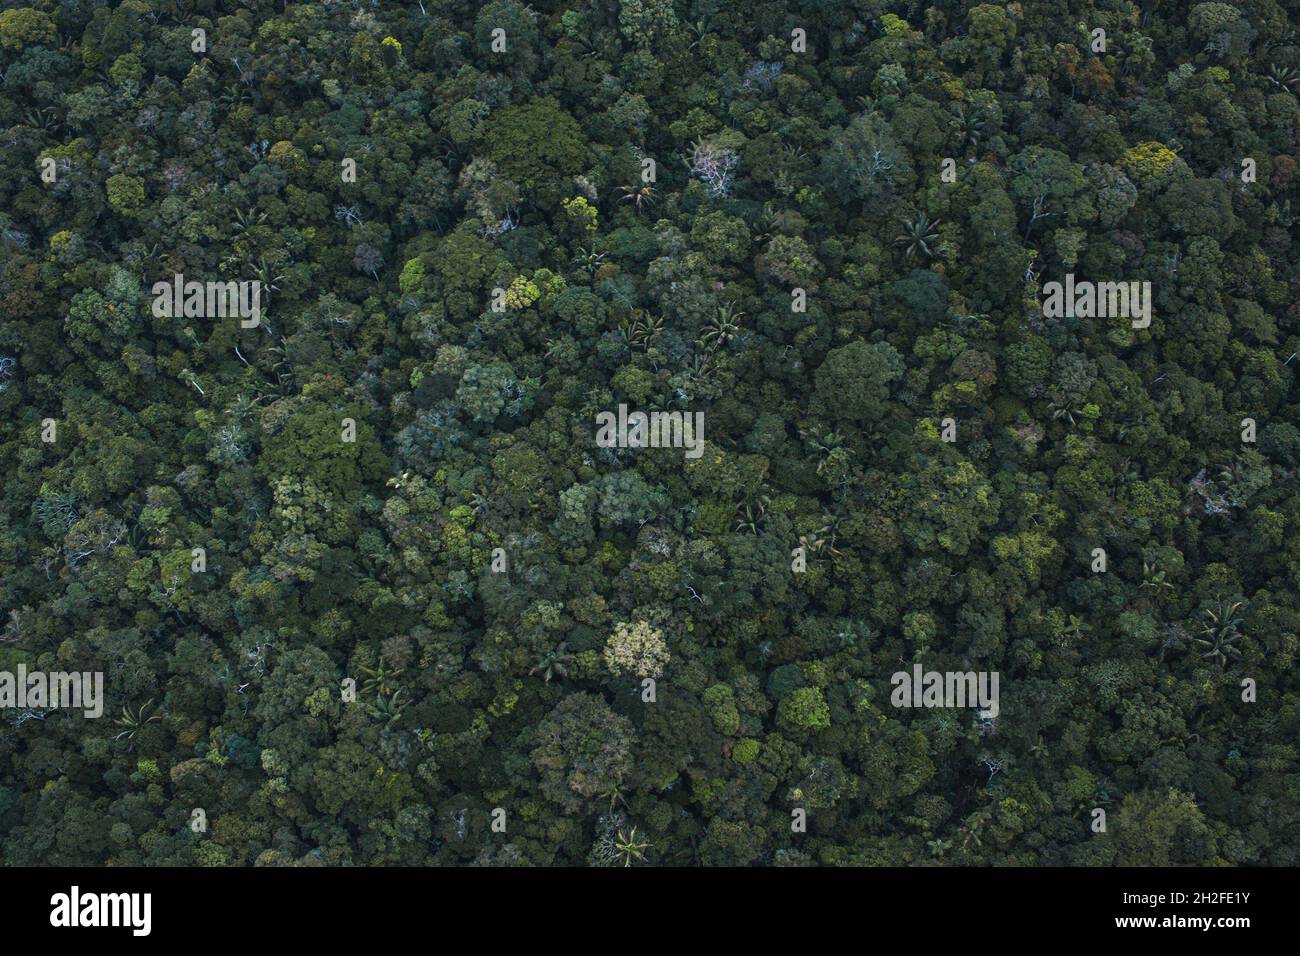 Wonderful texture background of thousands of trees with different green colors from above Stock Photo